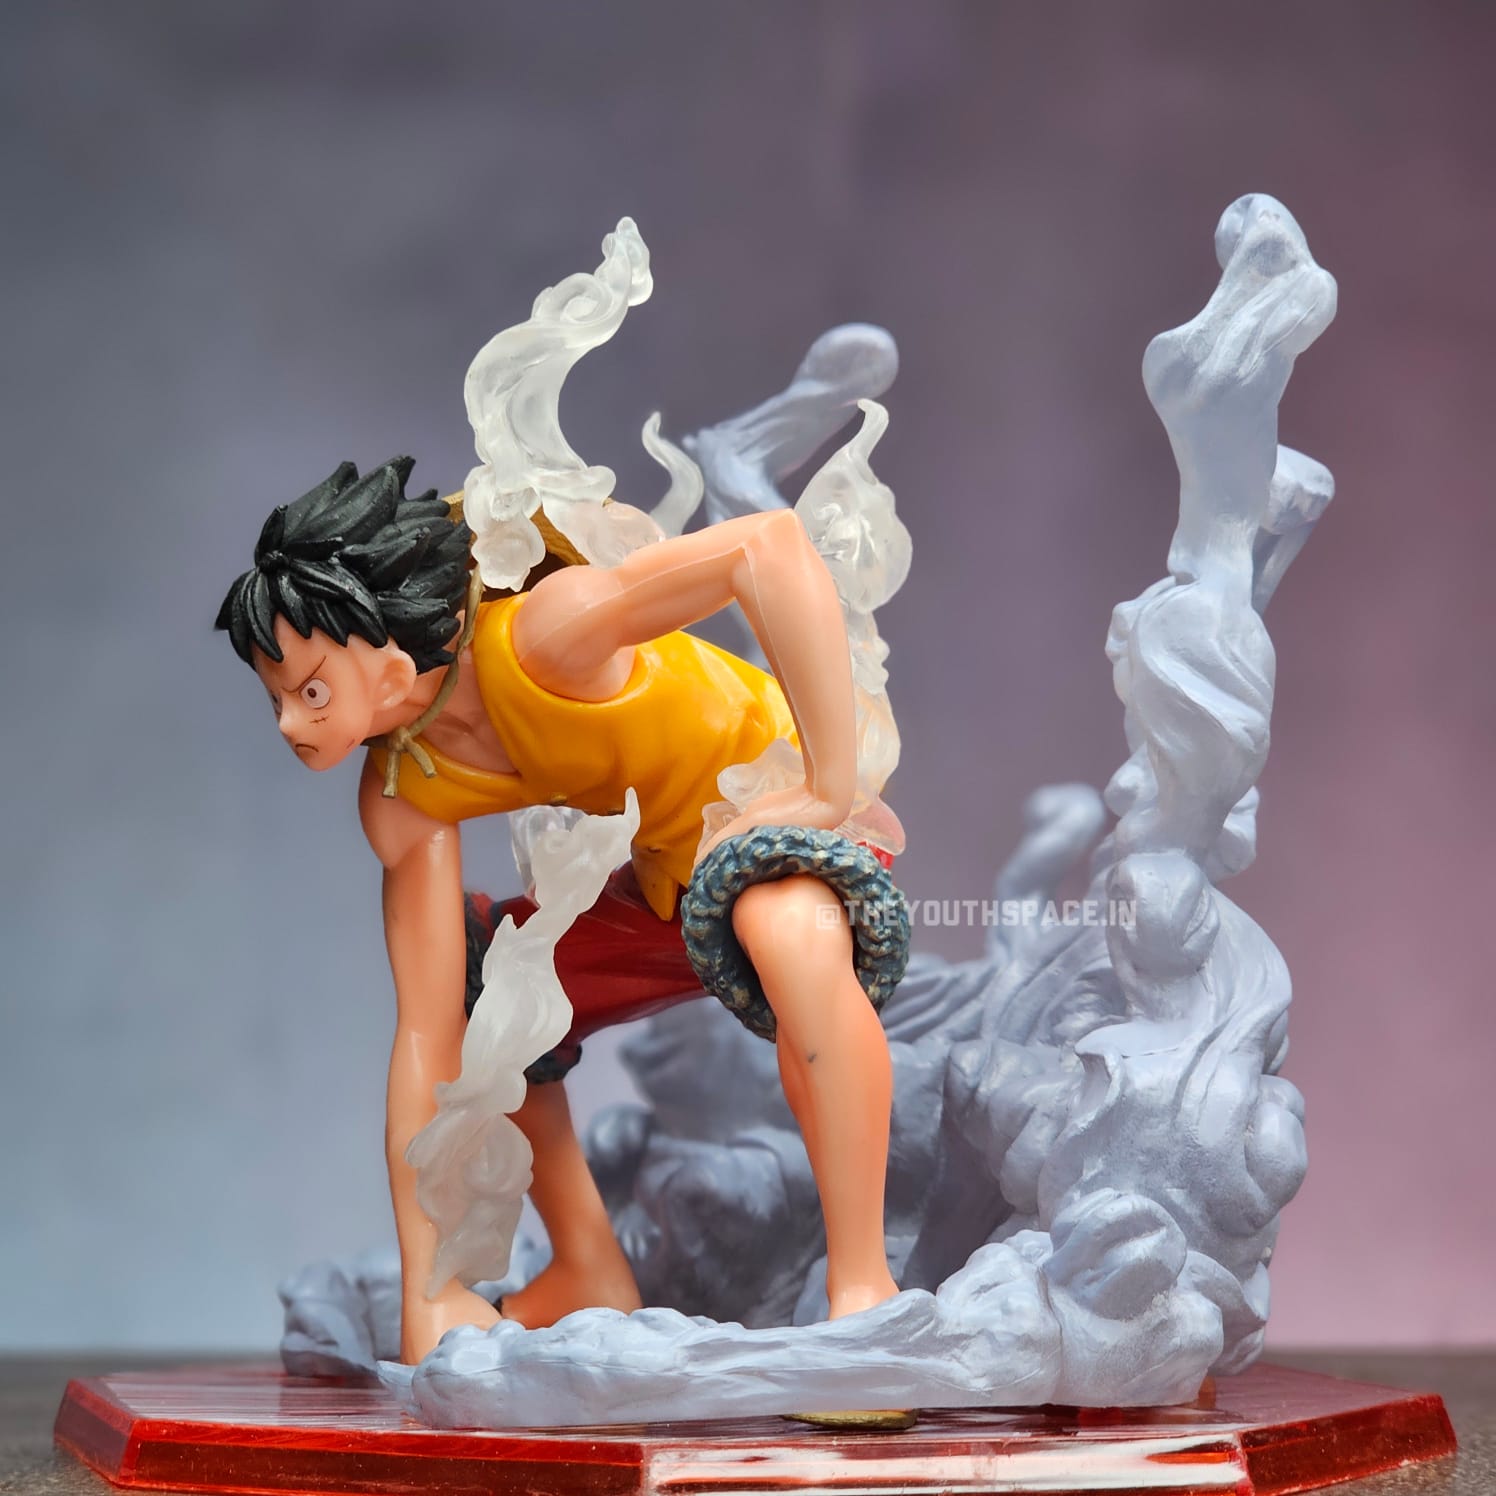 Gear 2 Luffy Action Figure - One Piece.